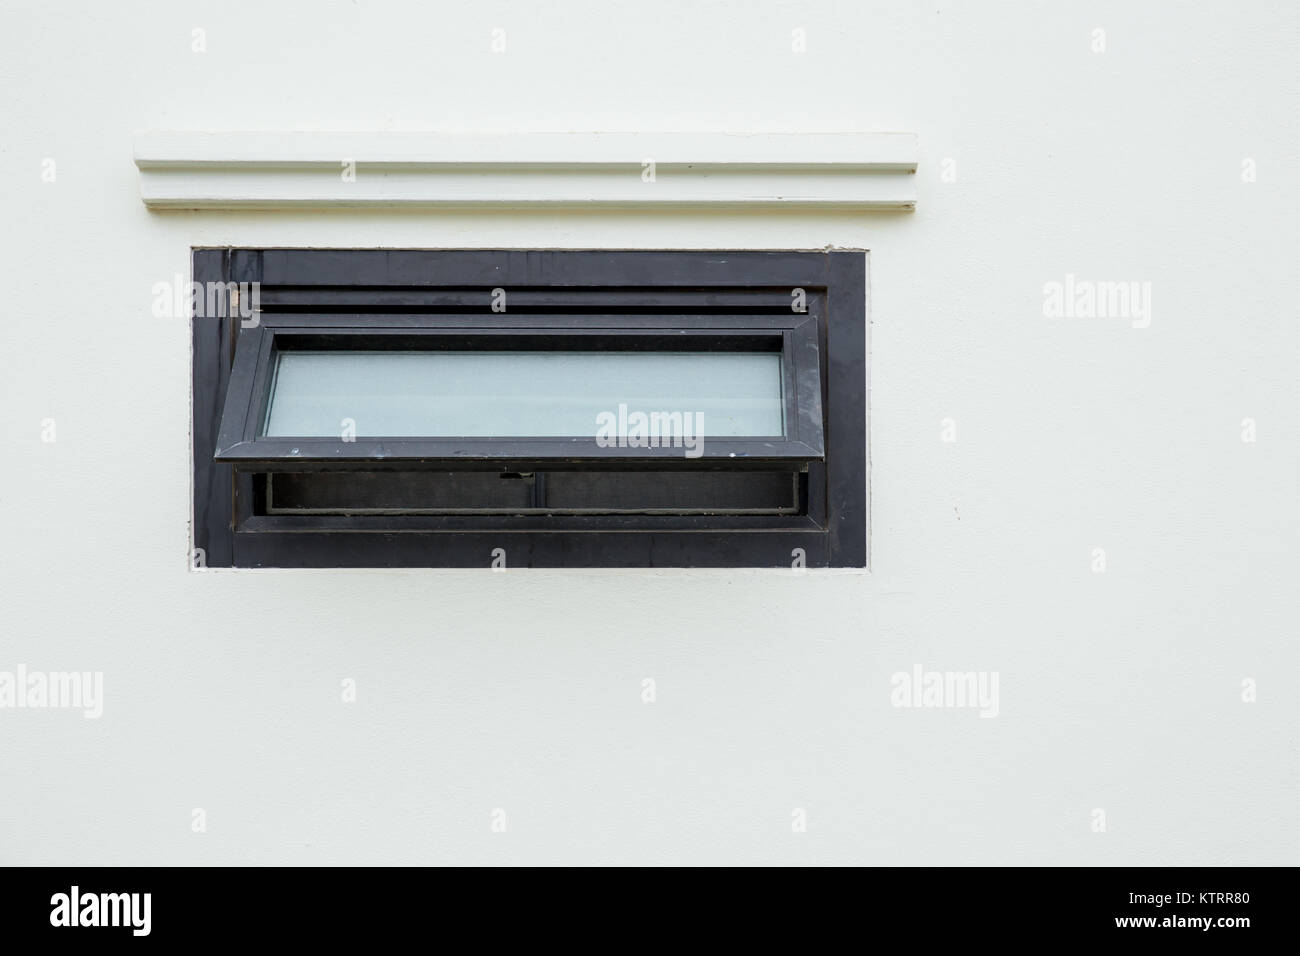 Bathroom Ventilation Window High Resolution Stock Photography And Images Alamy